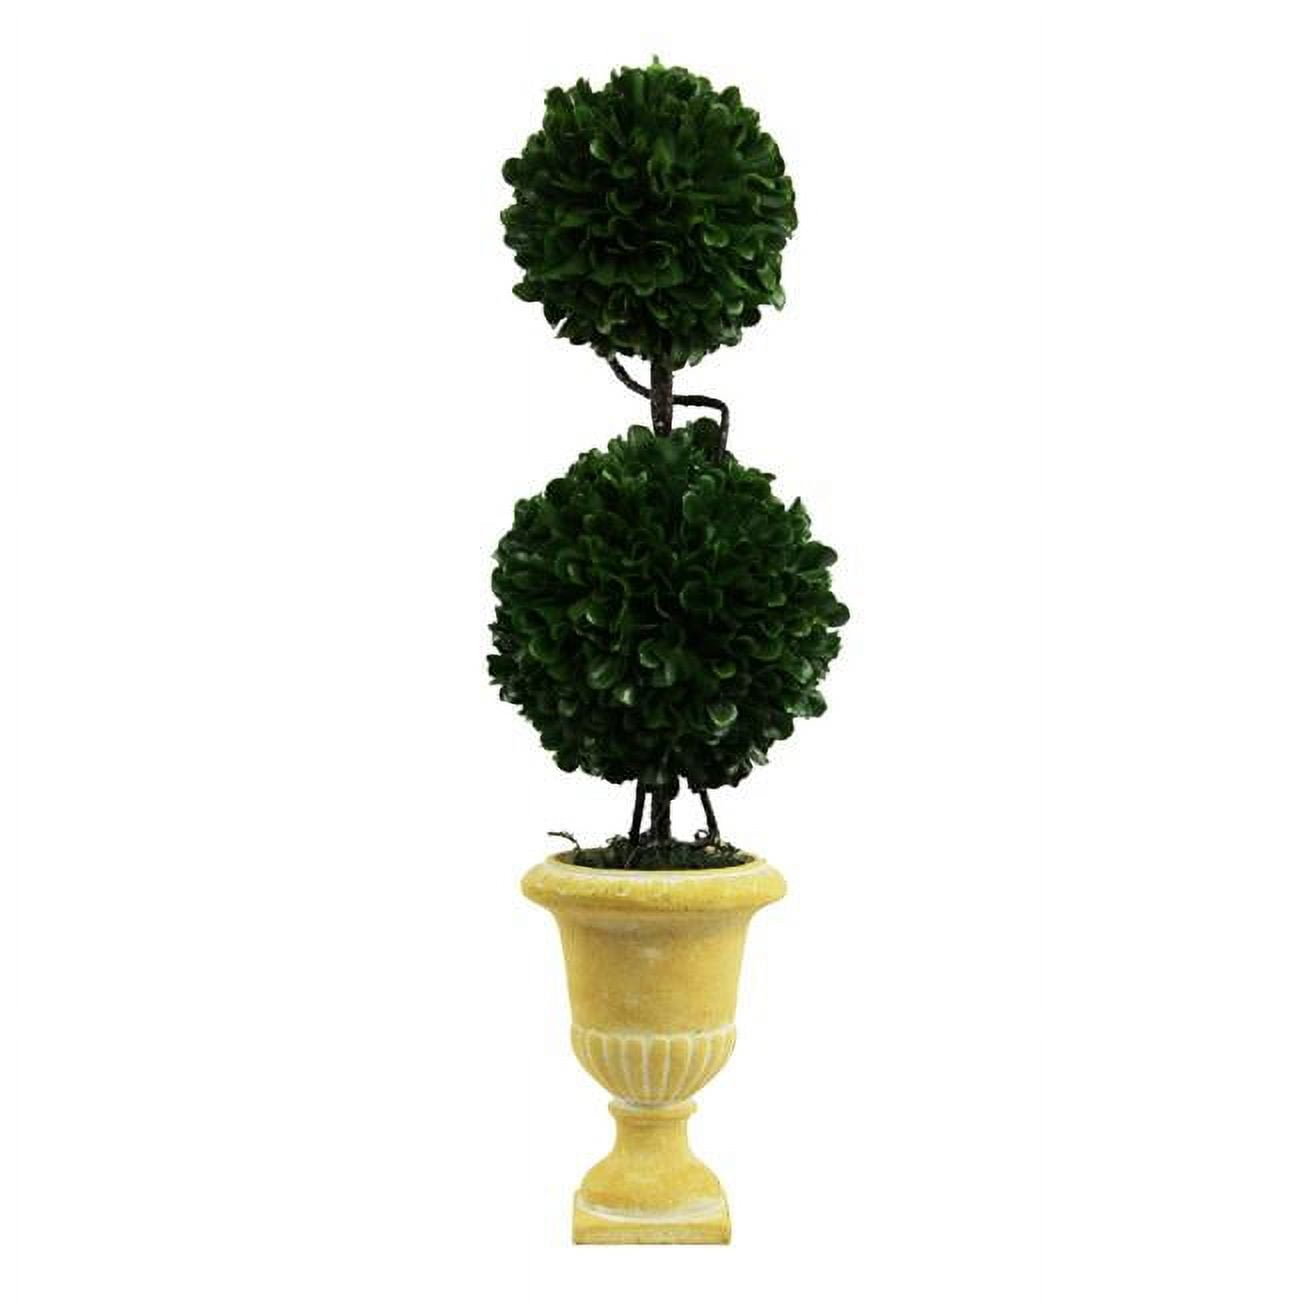 Picture of Admired By Nature ABN5P011-GRN 18 in. Faux Preserved Artificial Boxwood Topiary Plant Tabletop with Double Balls in Pot